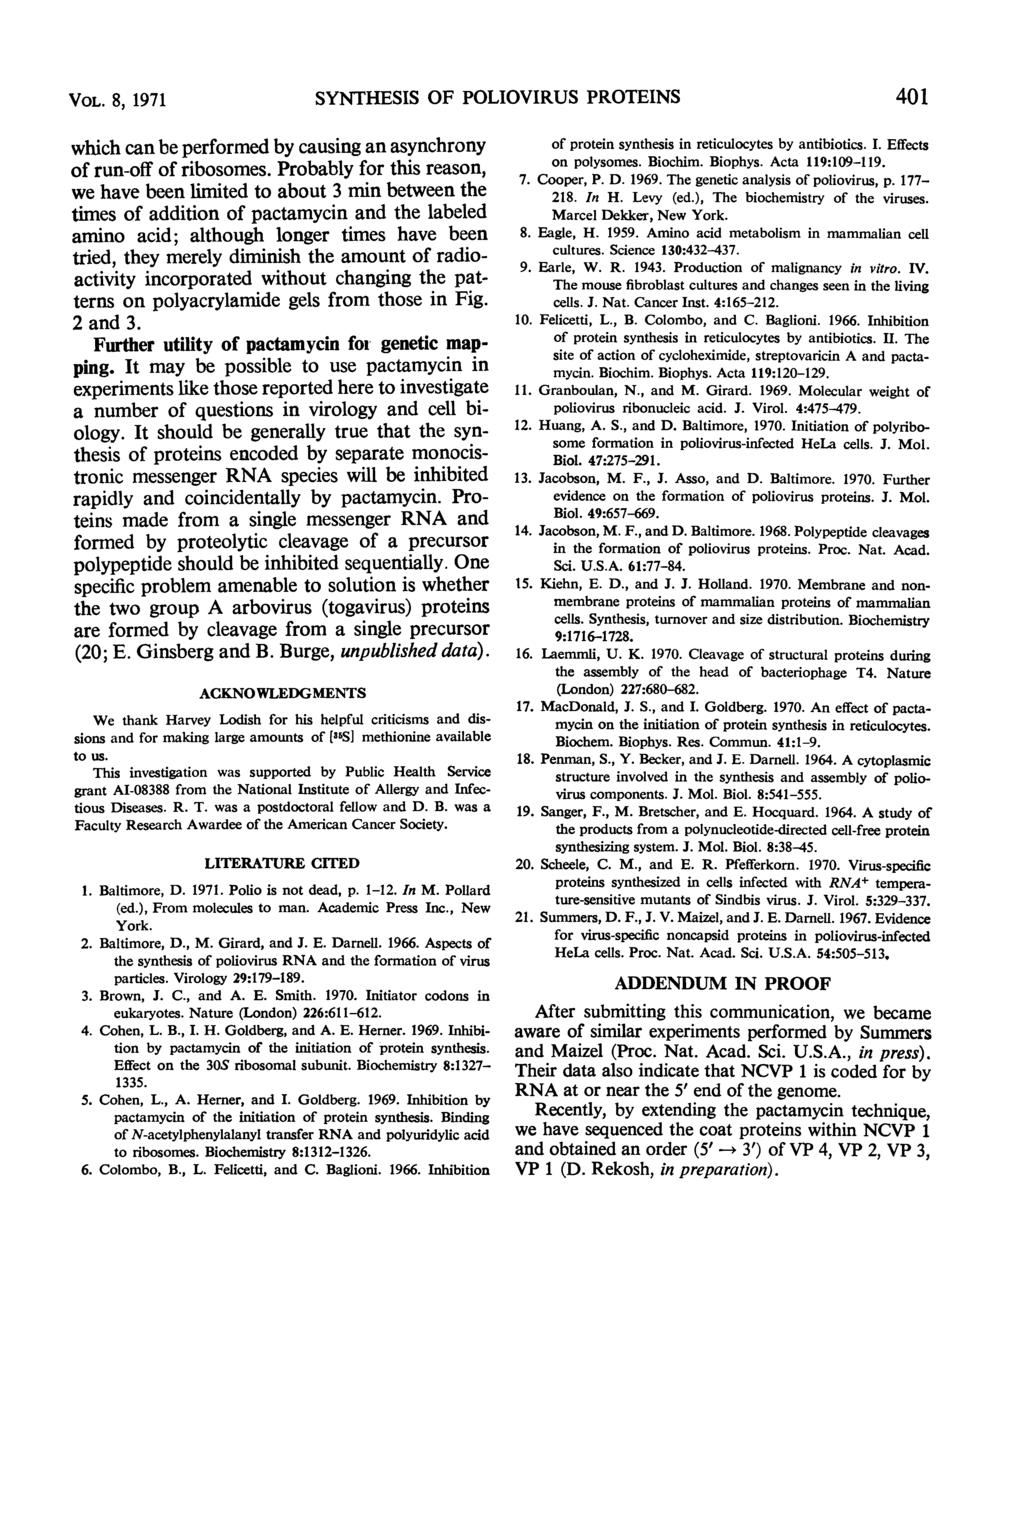 VOL. 8, 1971 SYNTHESIS OF POLIOVIRUS PROTEINS 41 which can be performed by causing an asynchrony of run-off of ribosomes.